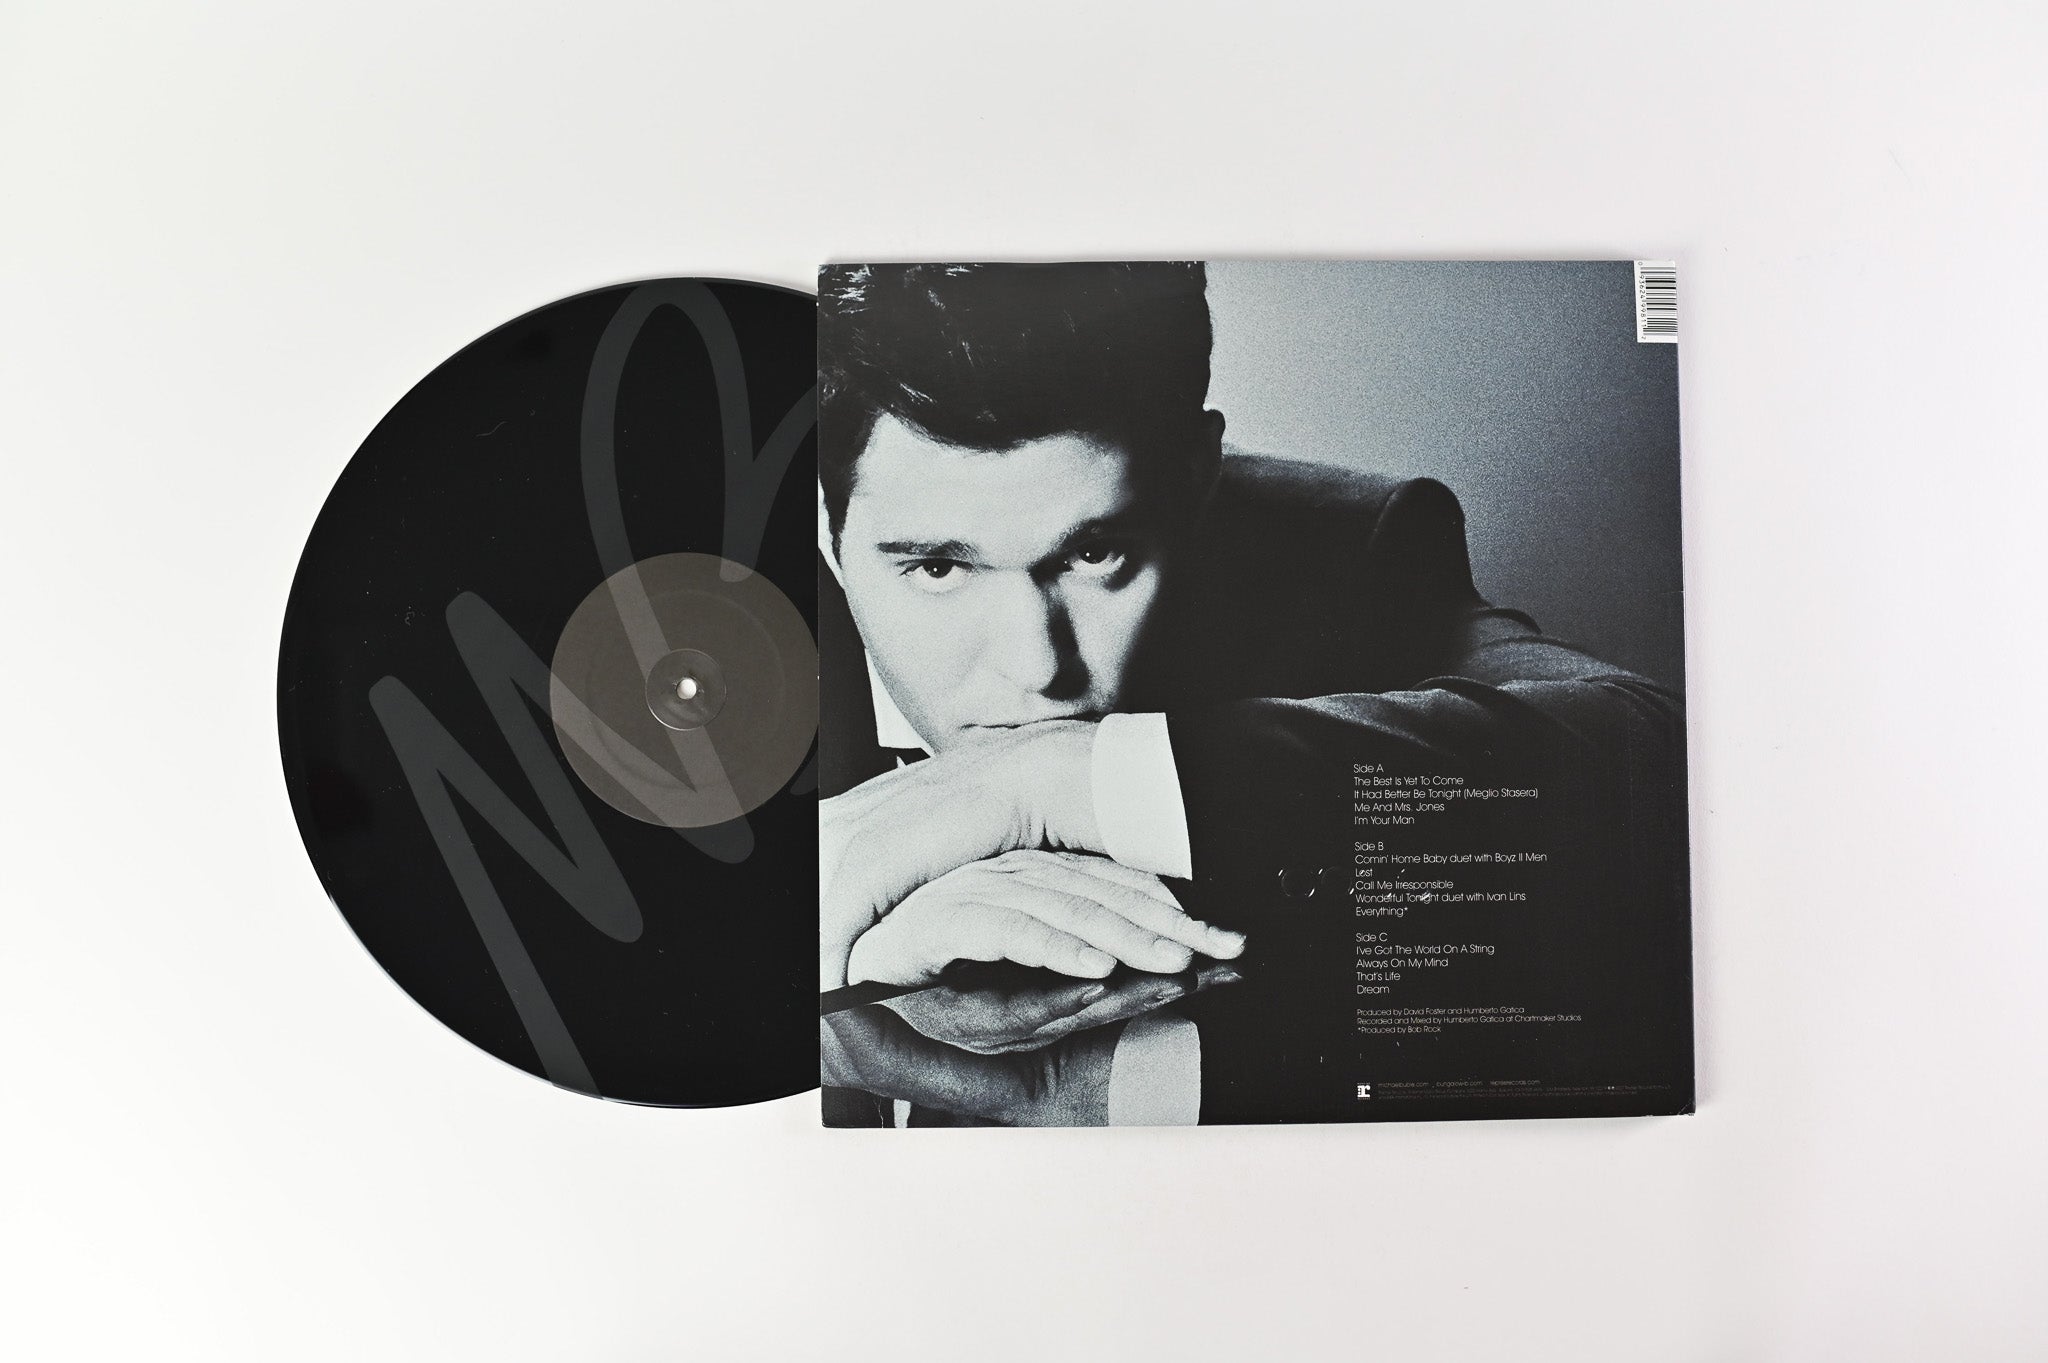 Michael Bublé - Call Me Irresponsible on 143/Reprise Records